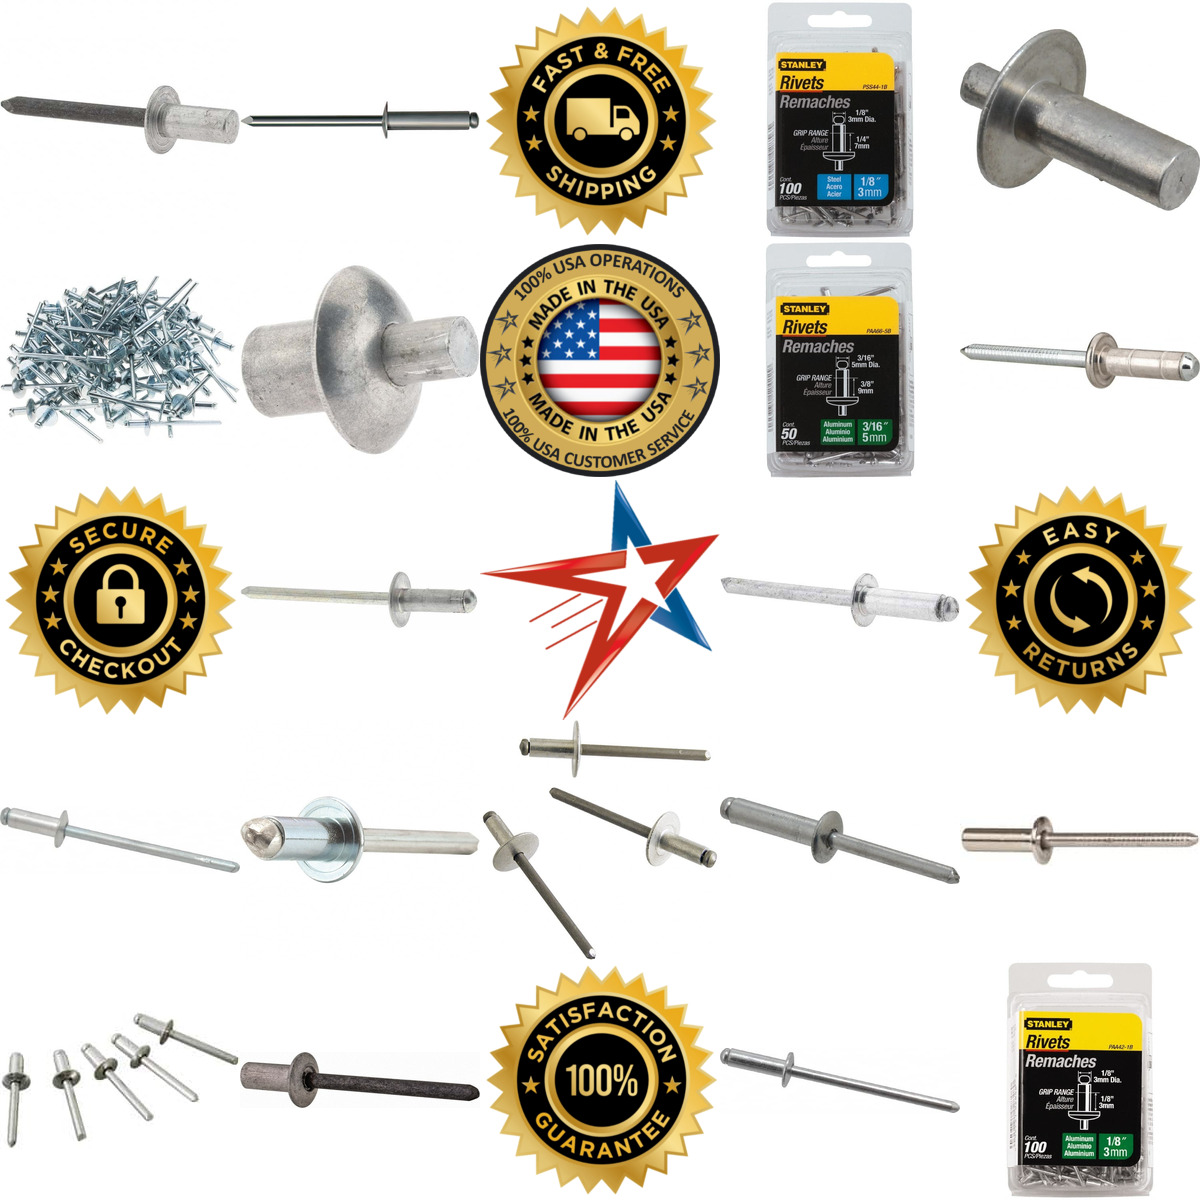 A selection of Blind Rivets products on GoVets